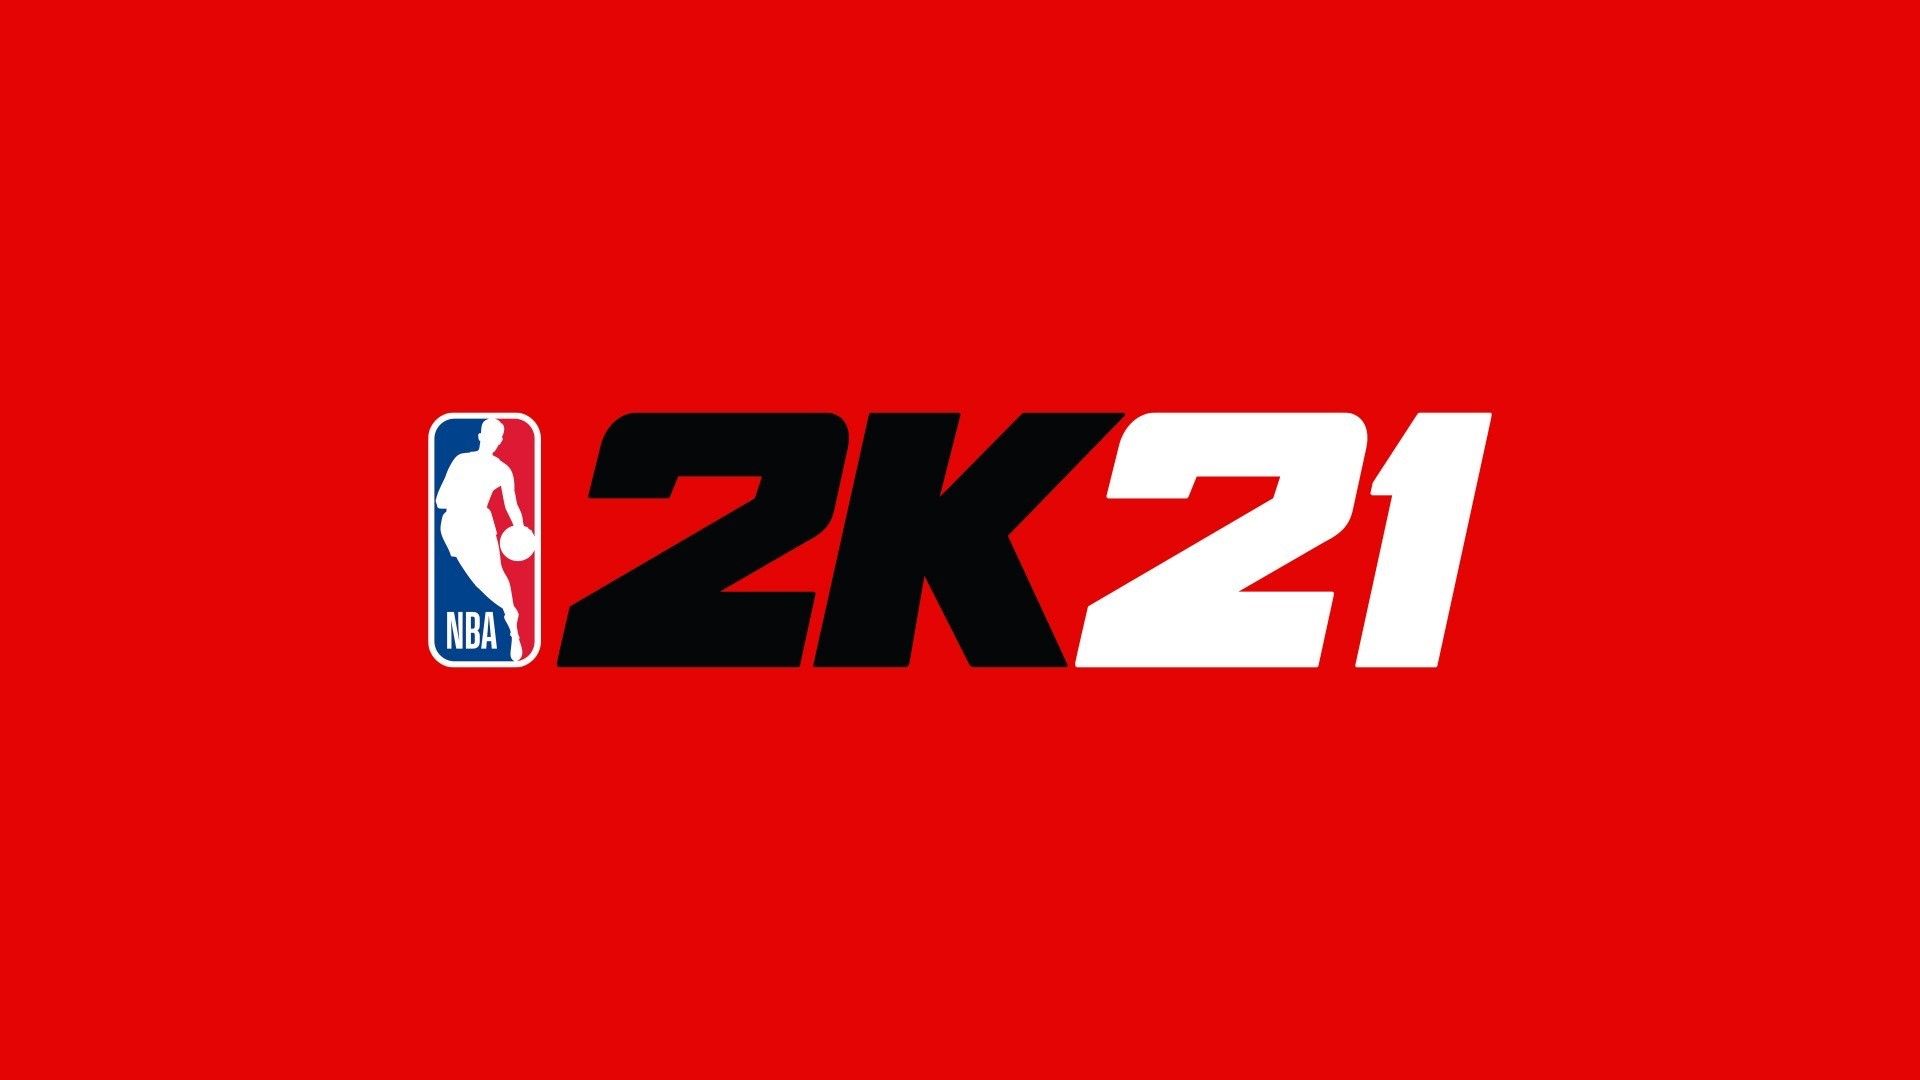 Kobe Bryant announced as the face of NBA 2K21 Mamba Forever Edition